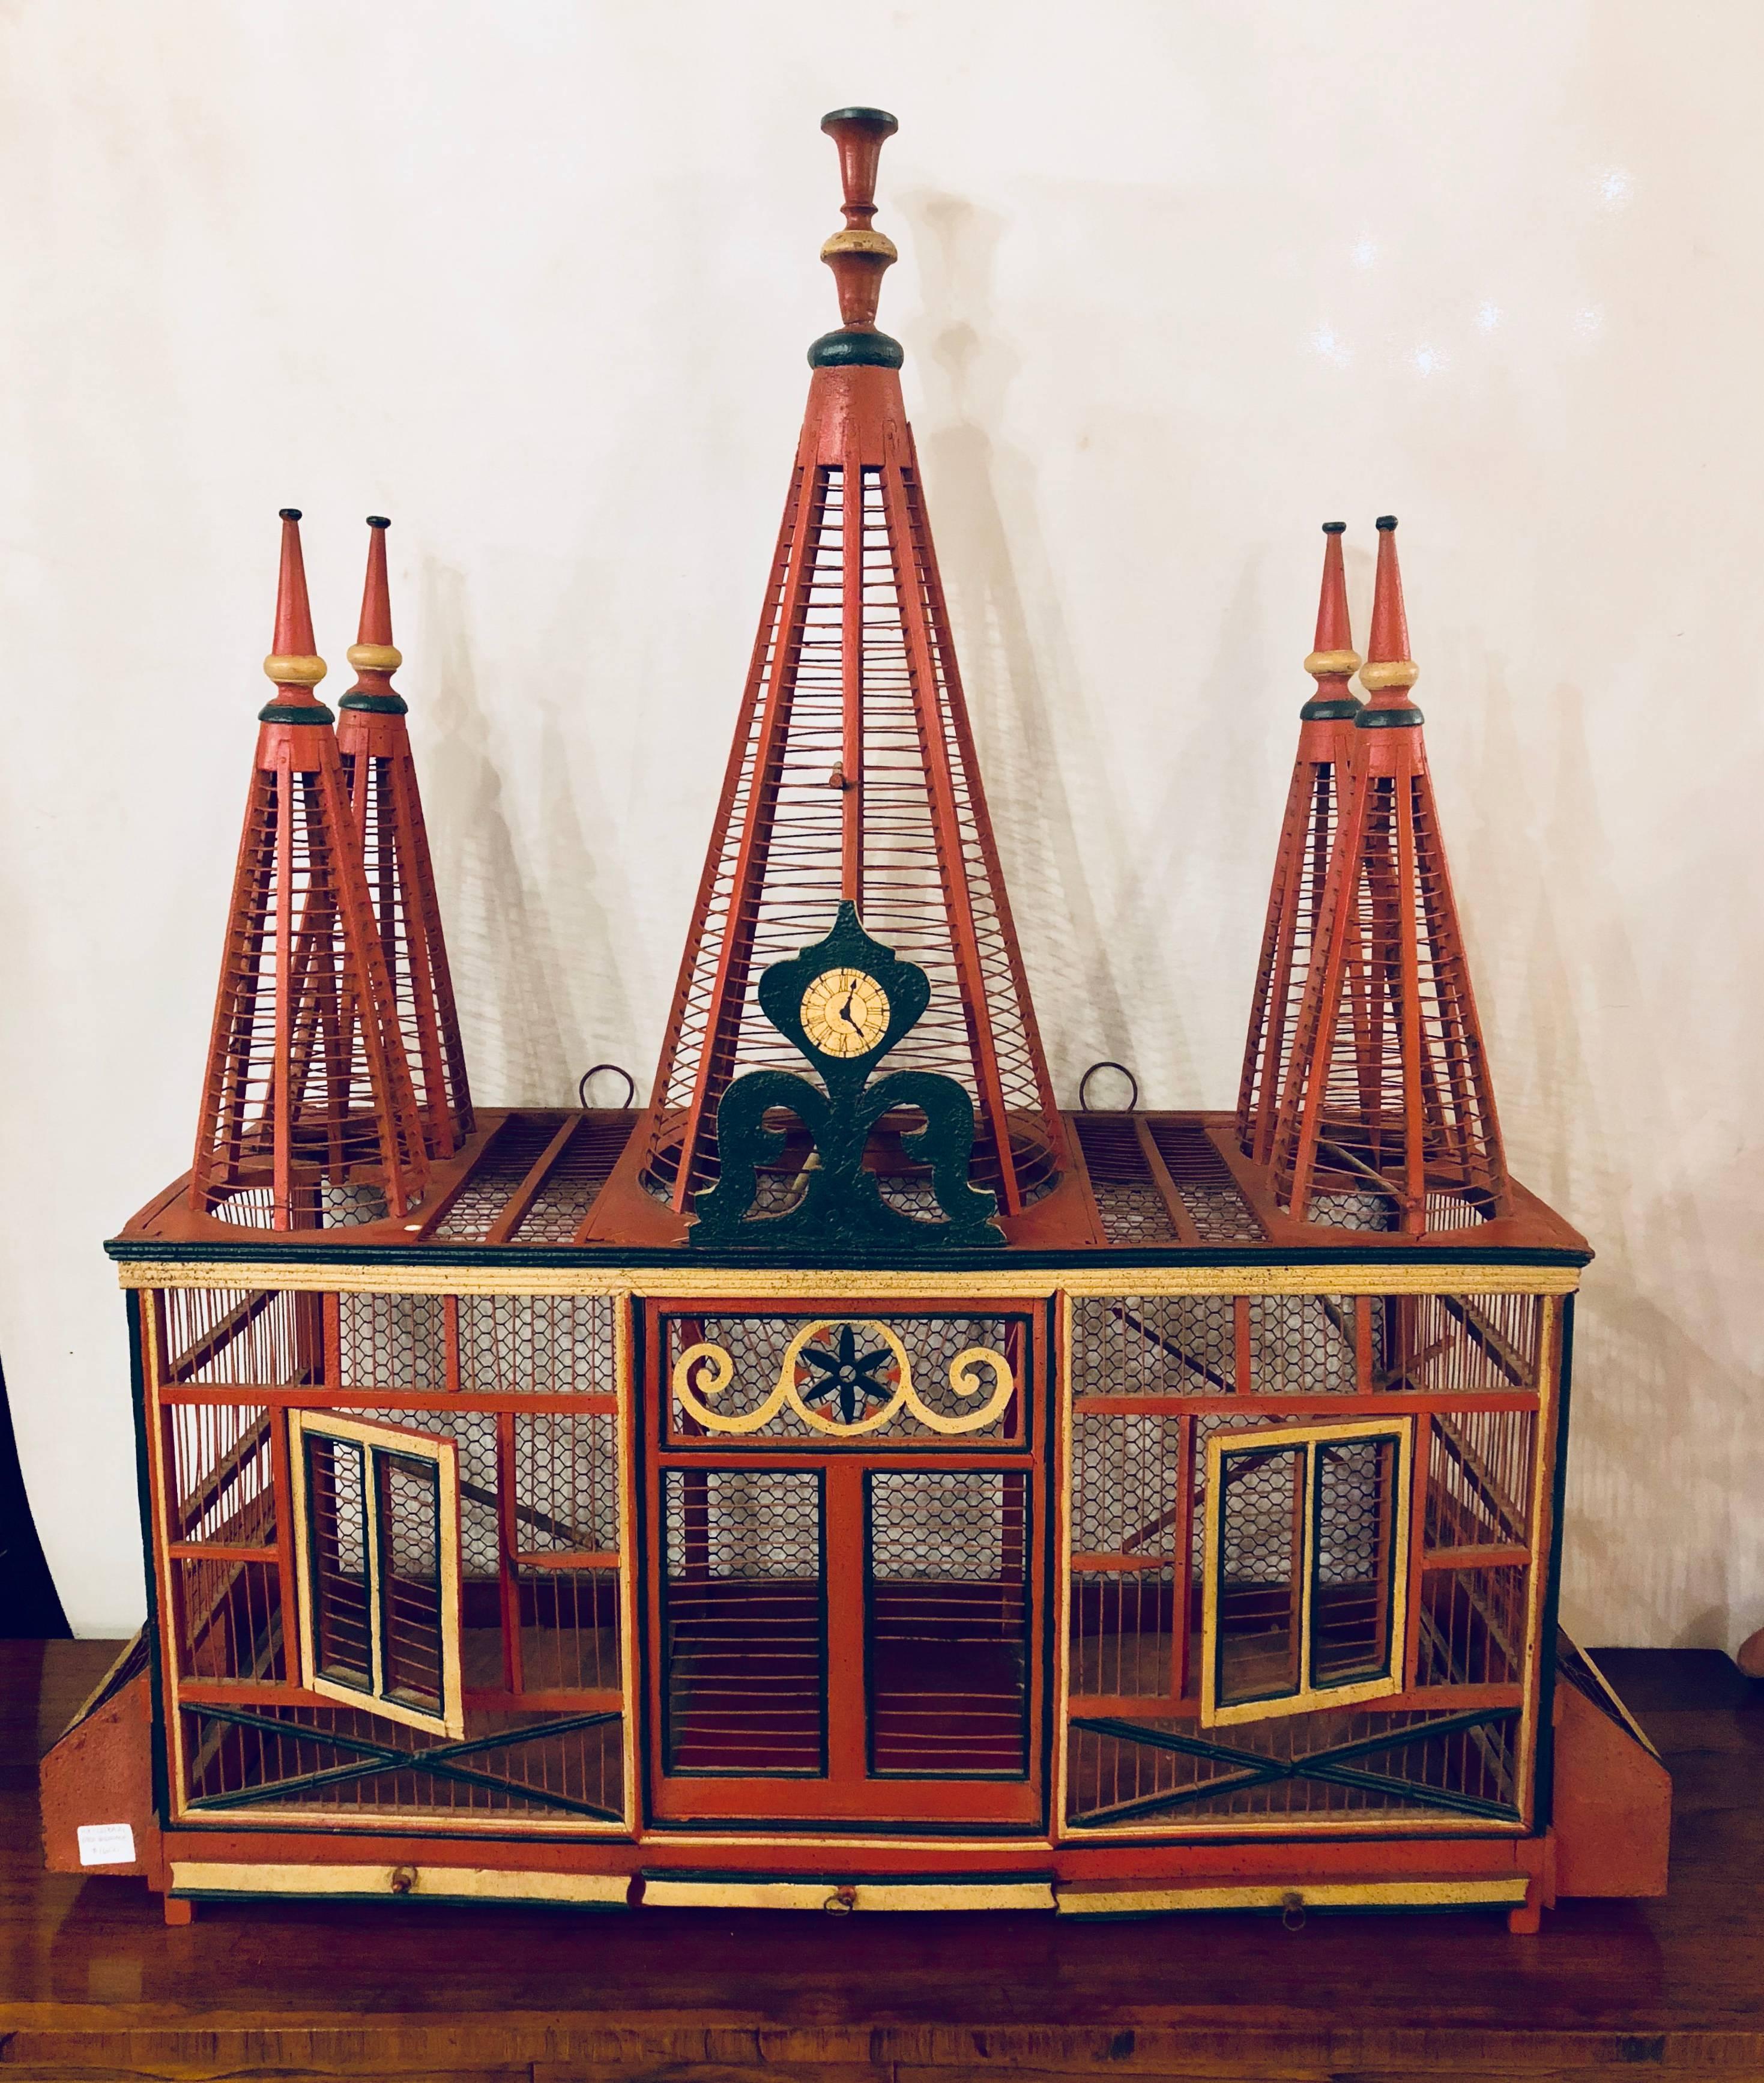 An Americana Folk Art original painted bird cage. In bright vibrant original paint comes this circus tent formed bird cage.